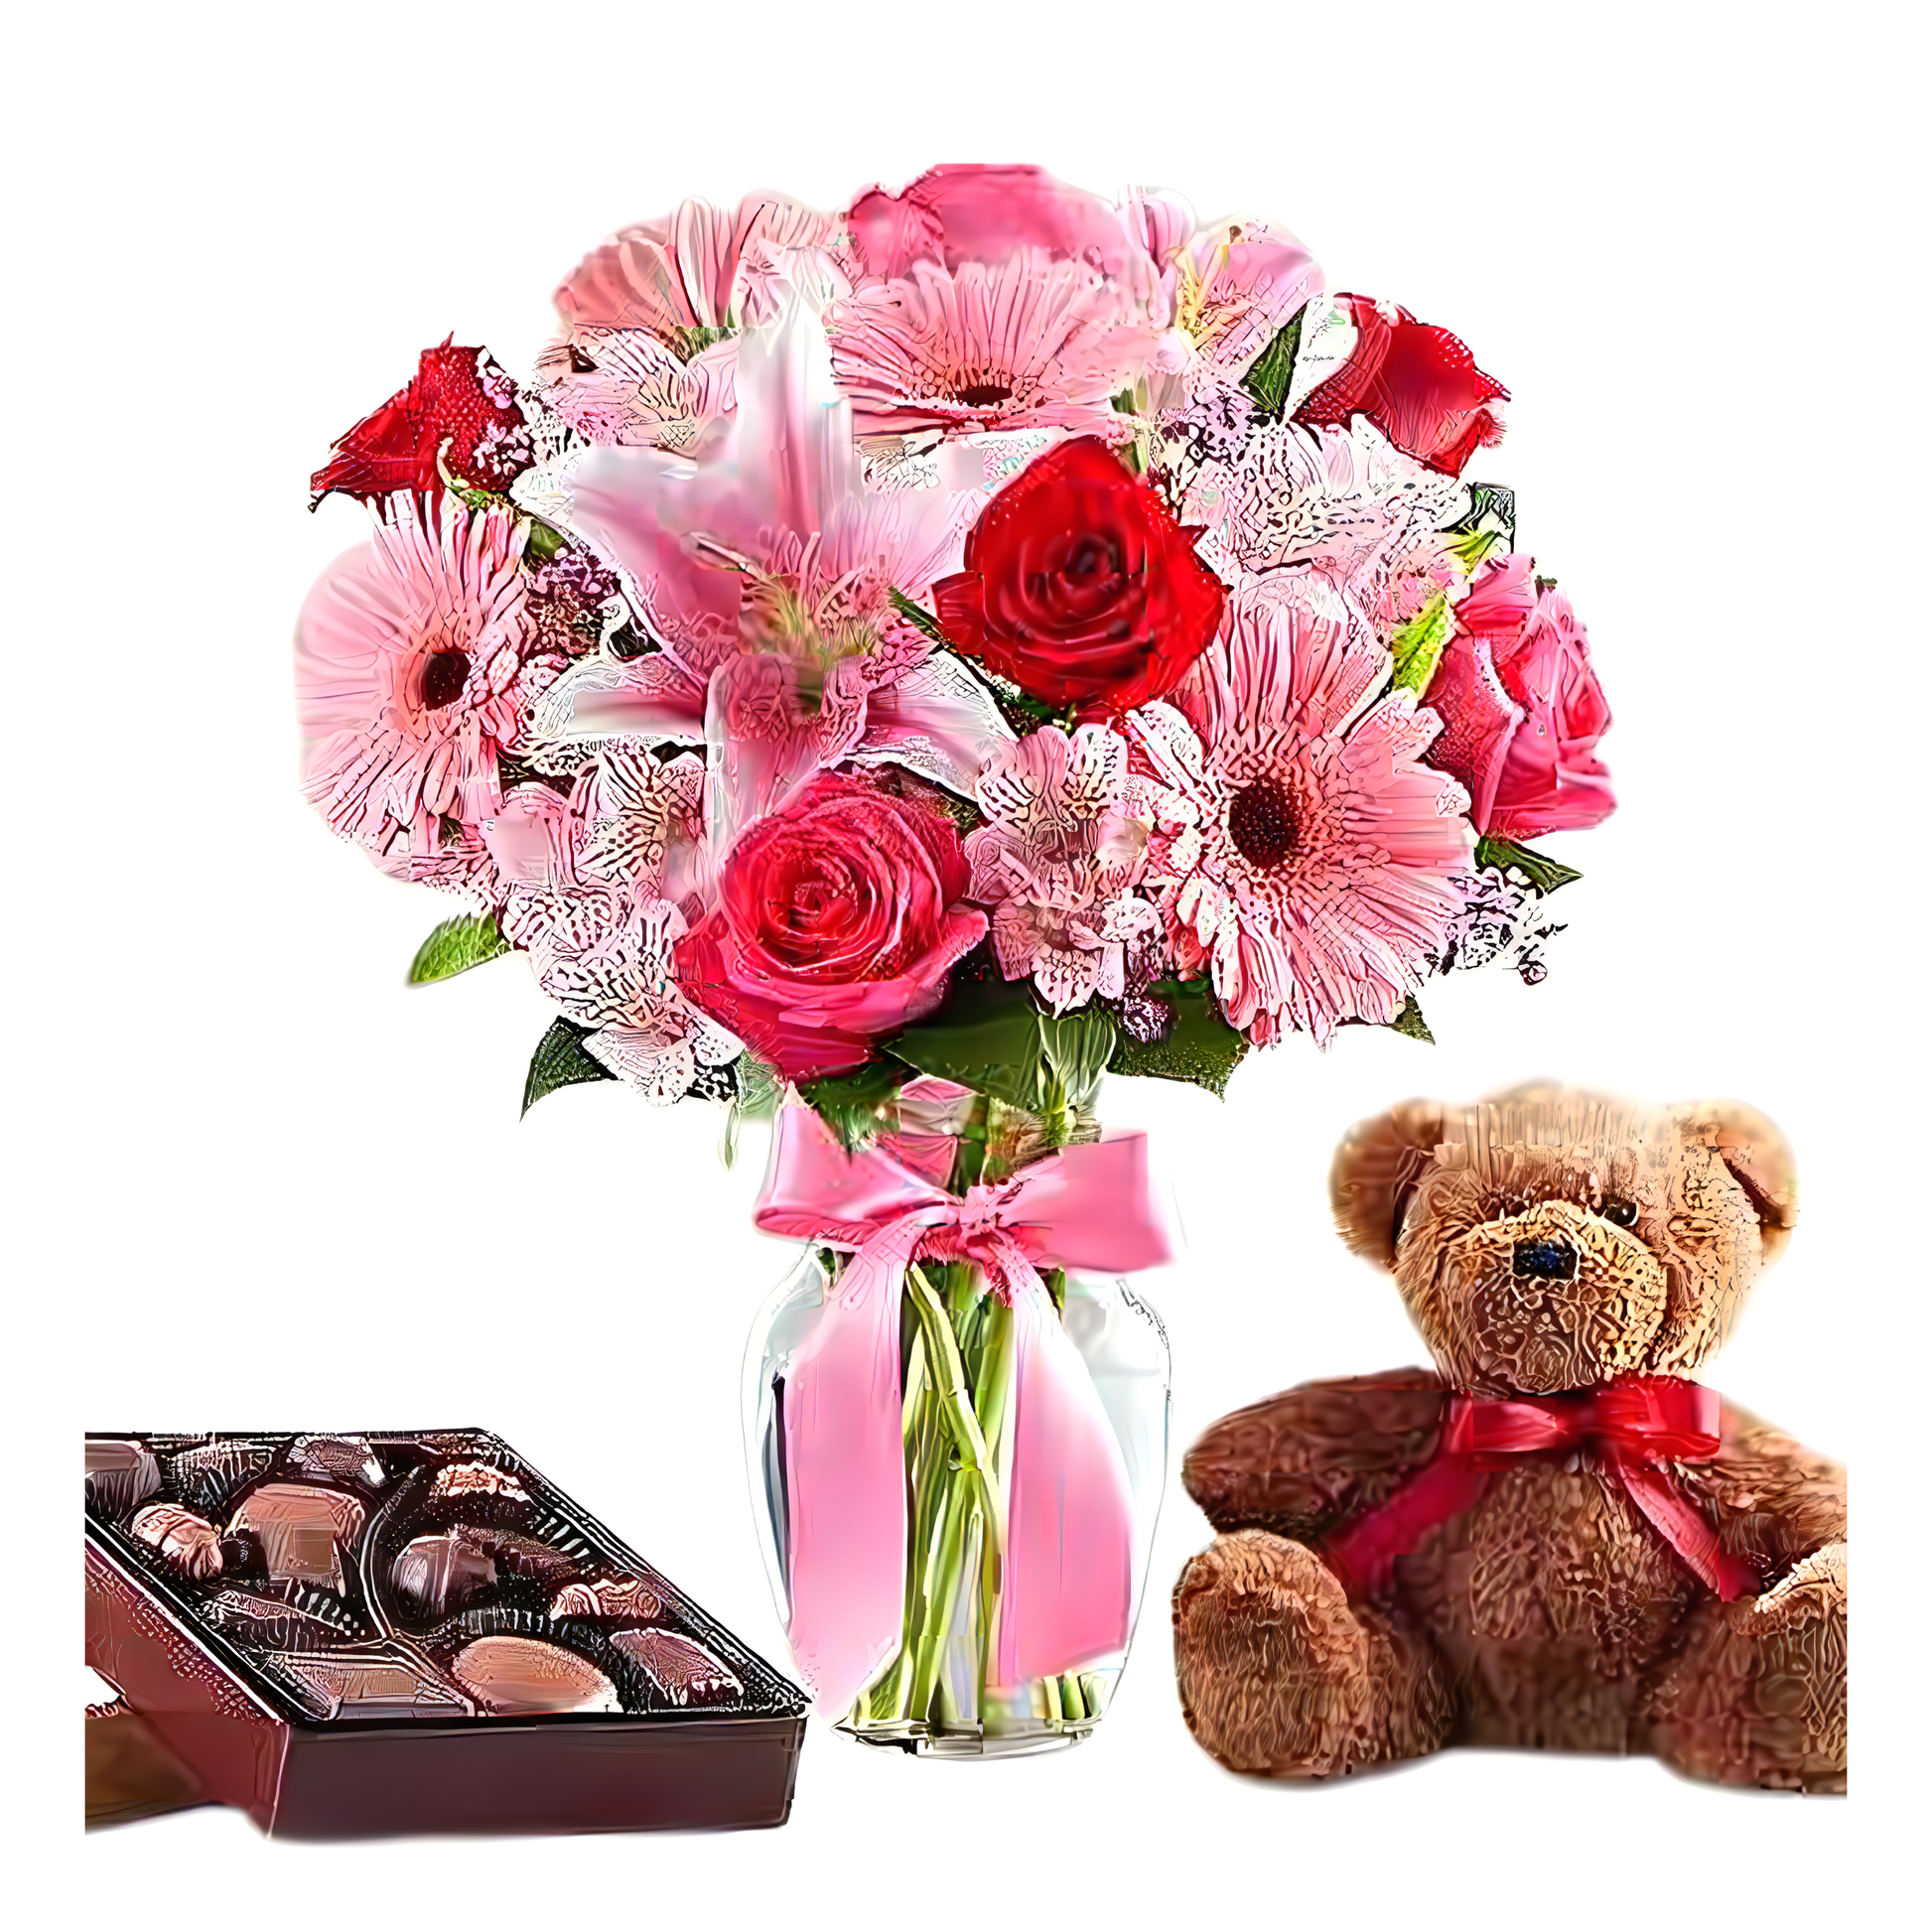 Queens Flower Delivery - My Valentine's Love With Teddy Bear & Chocolates